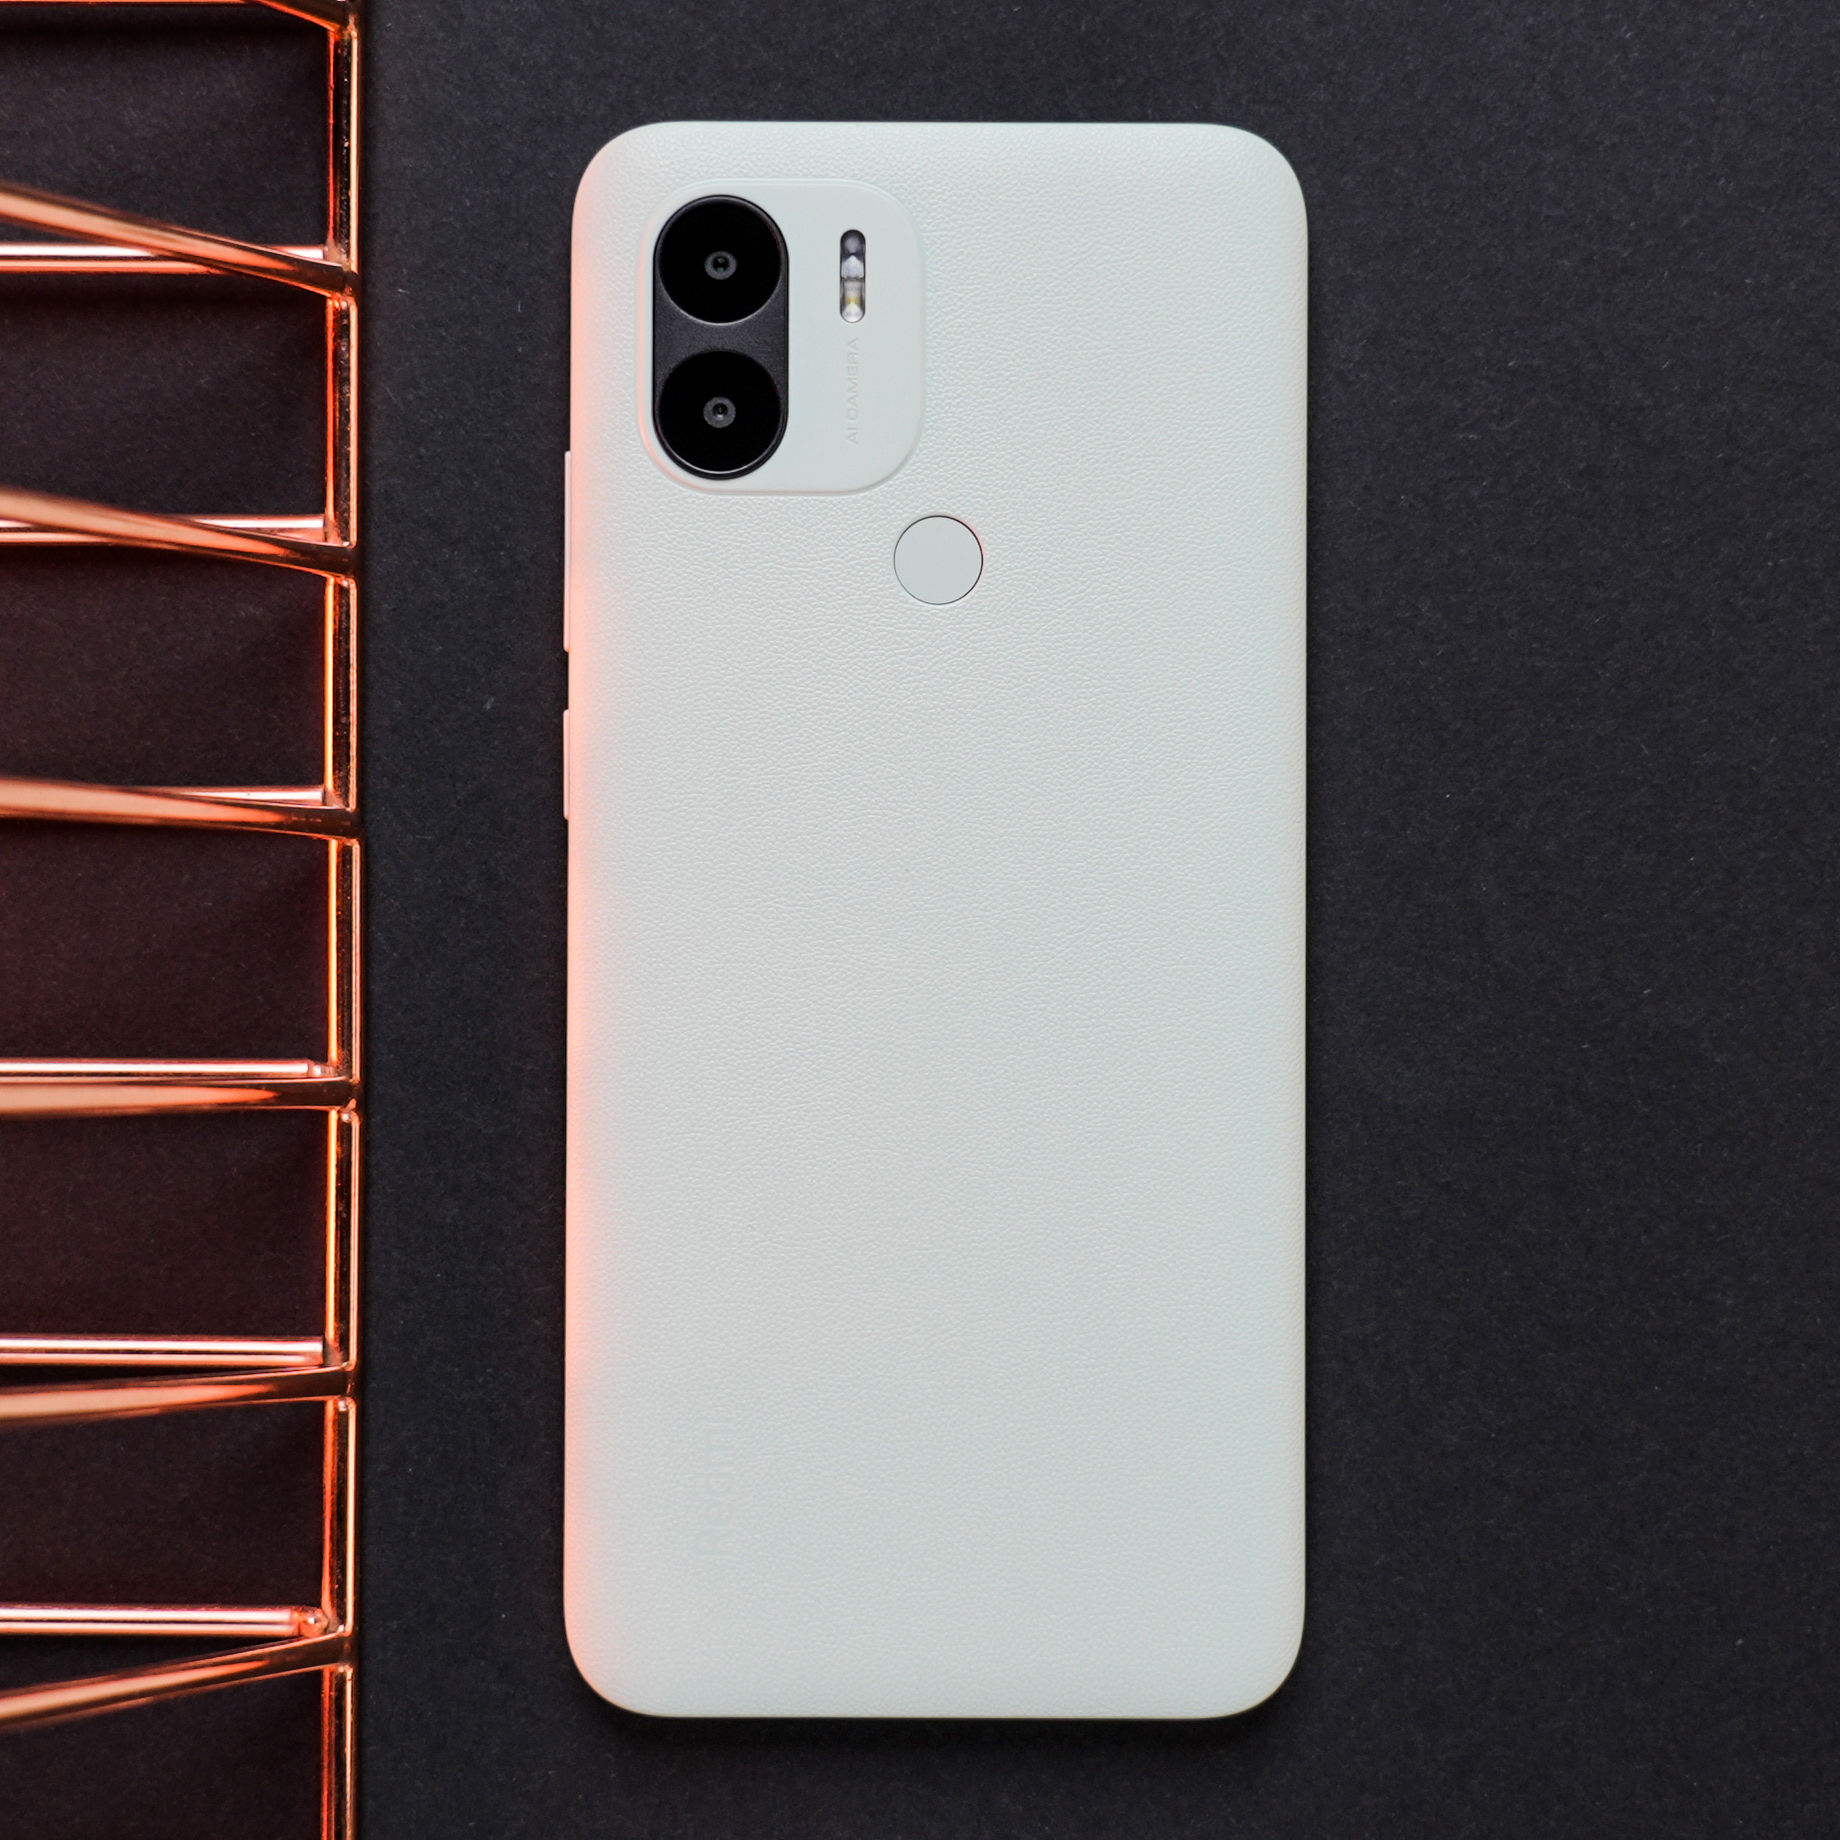 Redmi A2, Redmi A2+ launched in India: price, specifications, availability